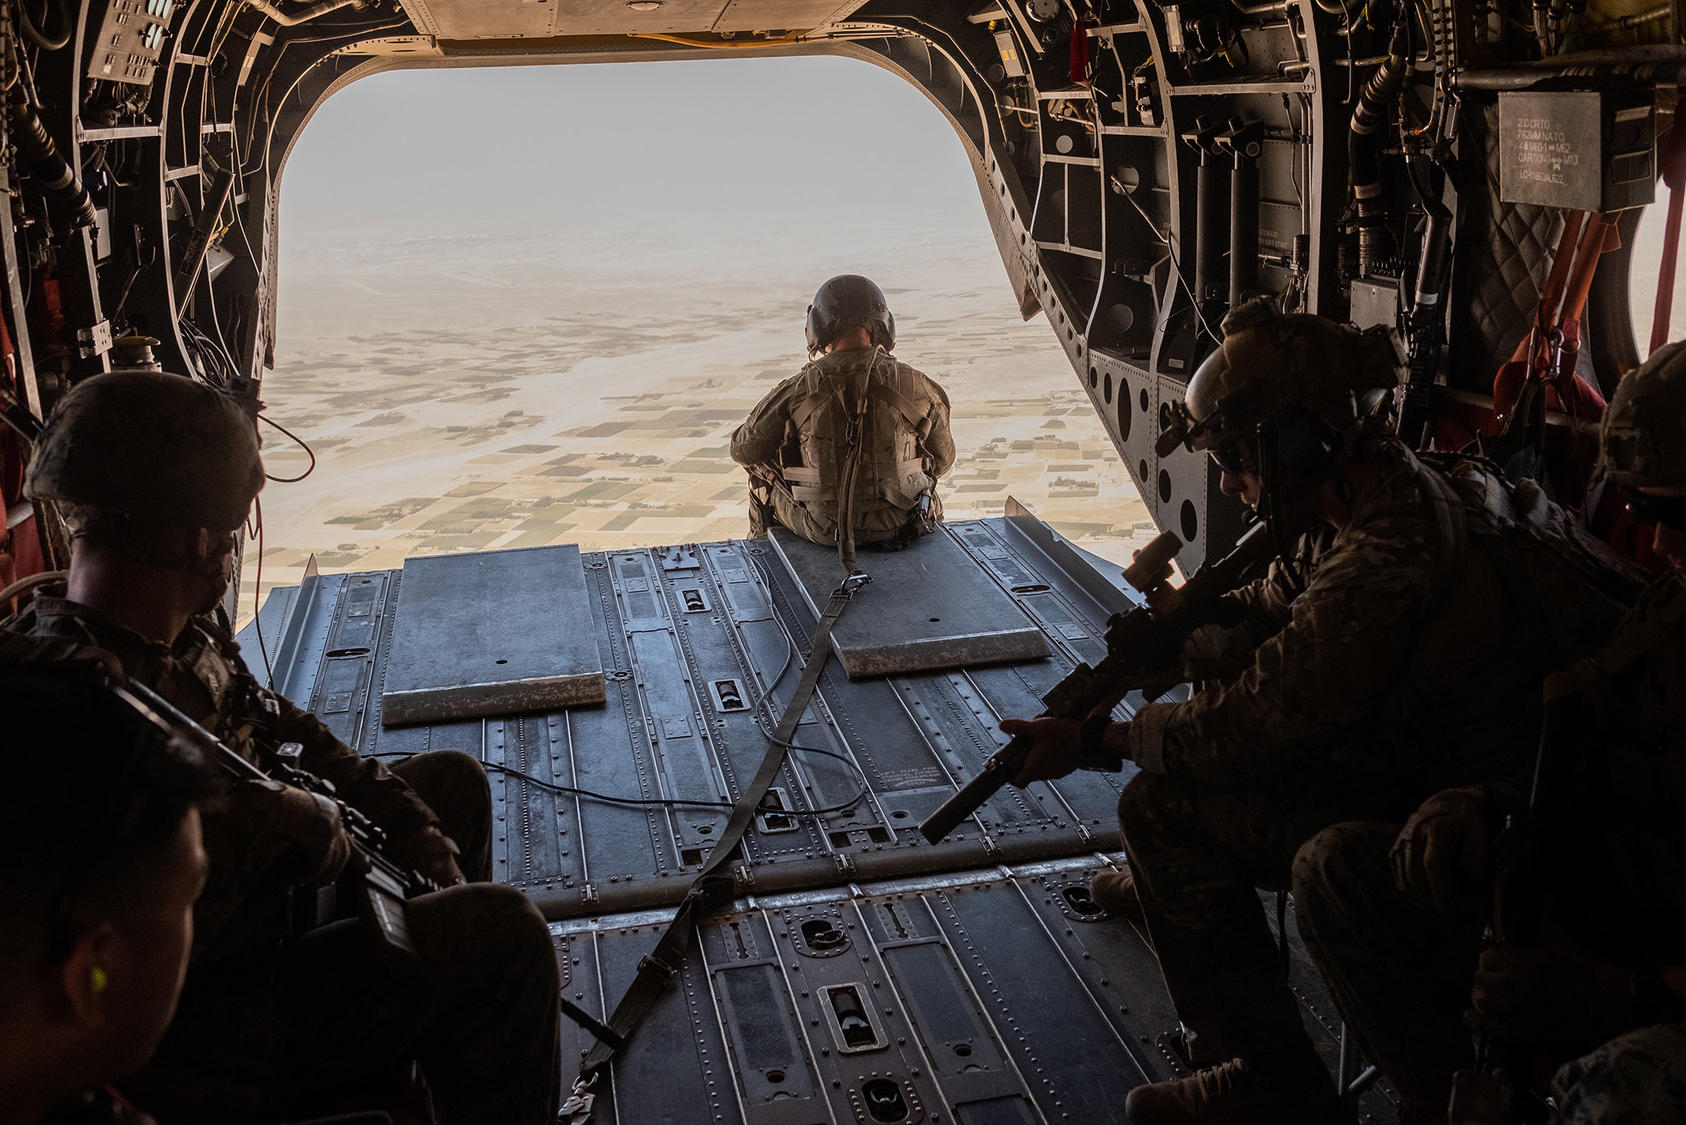 U.S. troops in a helicopter above Helmand Province in Afghanistan Sept. 26, 2019. (Jim Huylebroek/The New York Times)